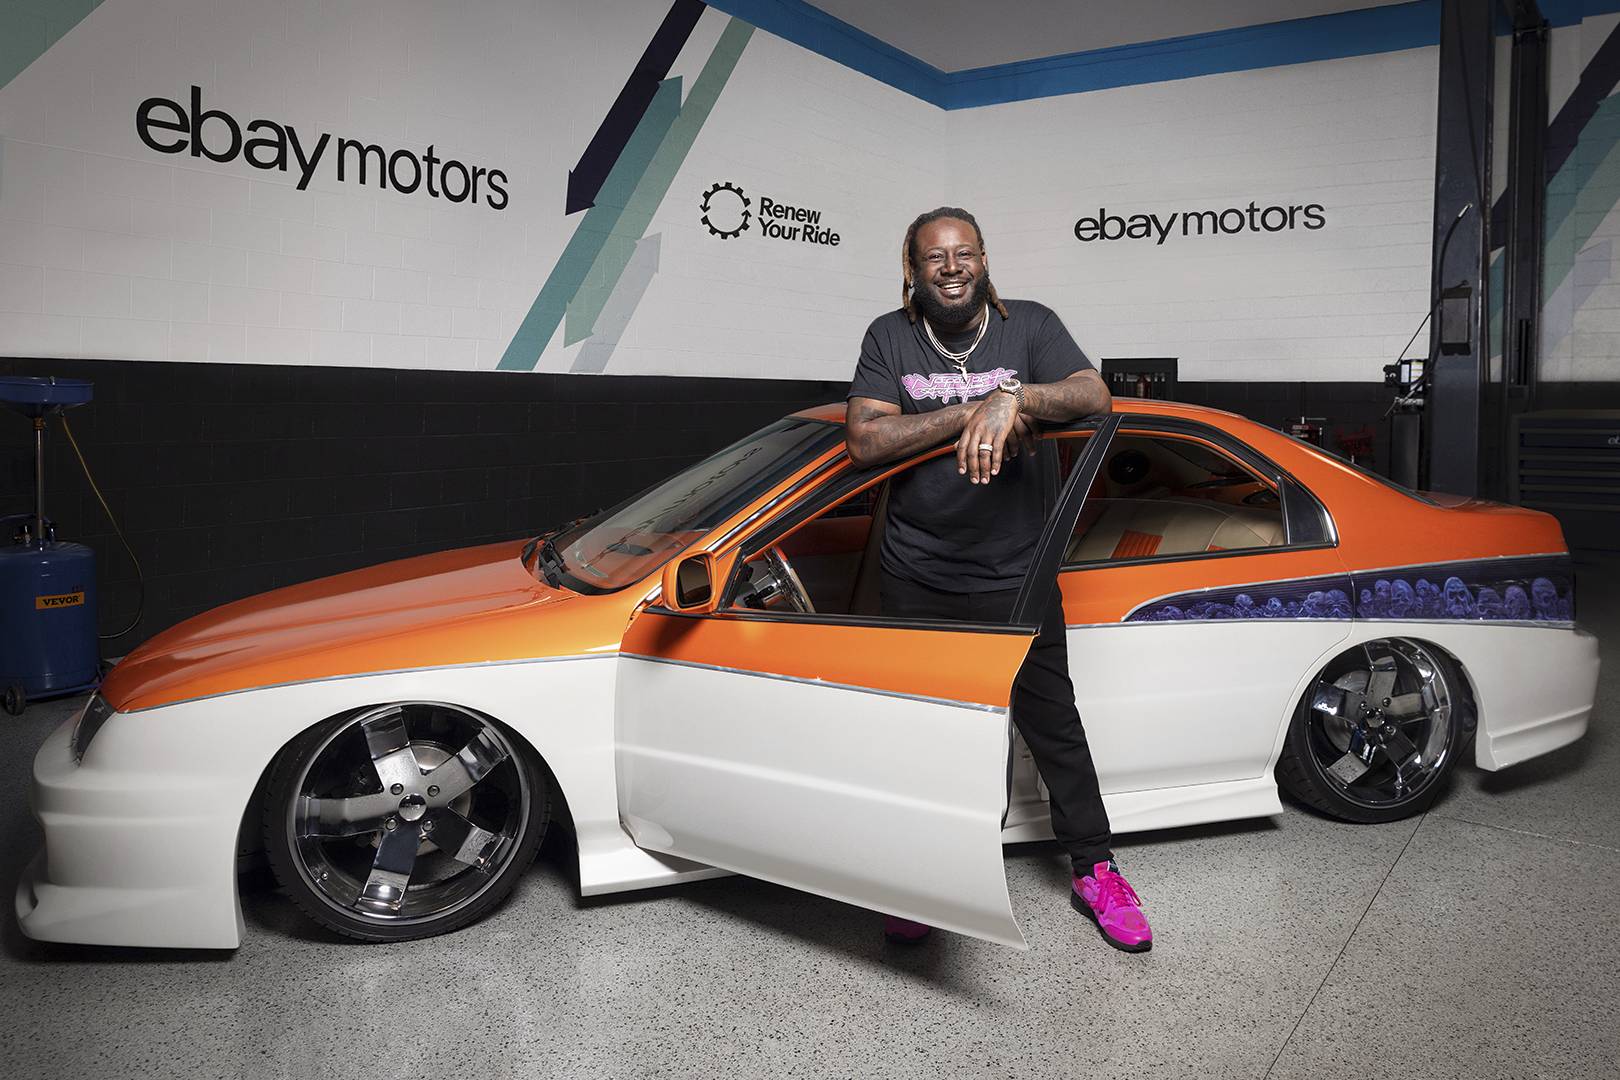 t-pain poses with his tricked-out 1994 honda accord in the ebay motors garage